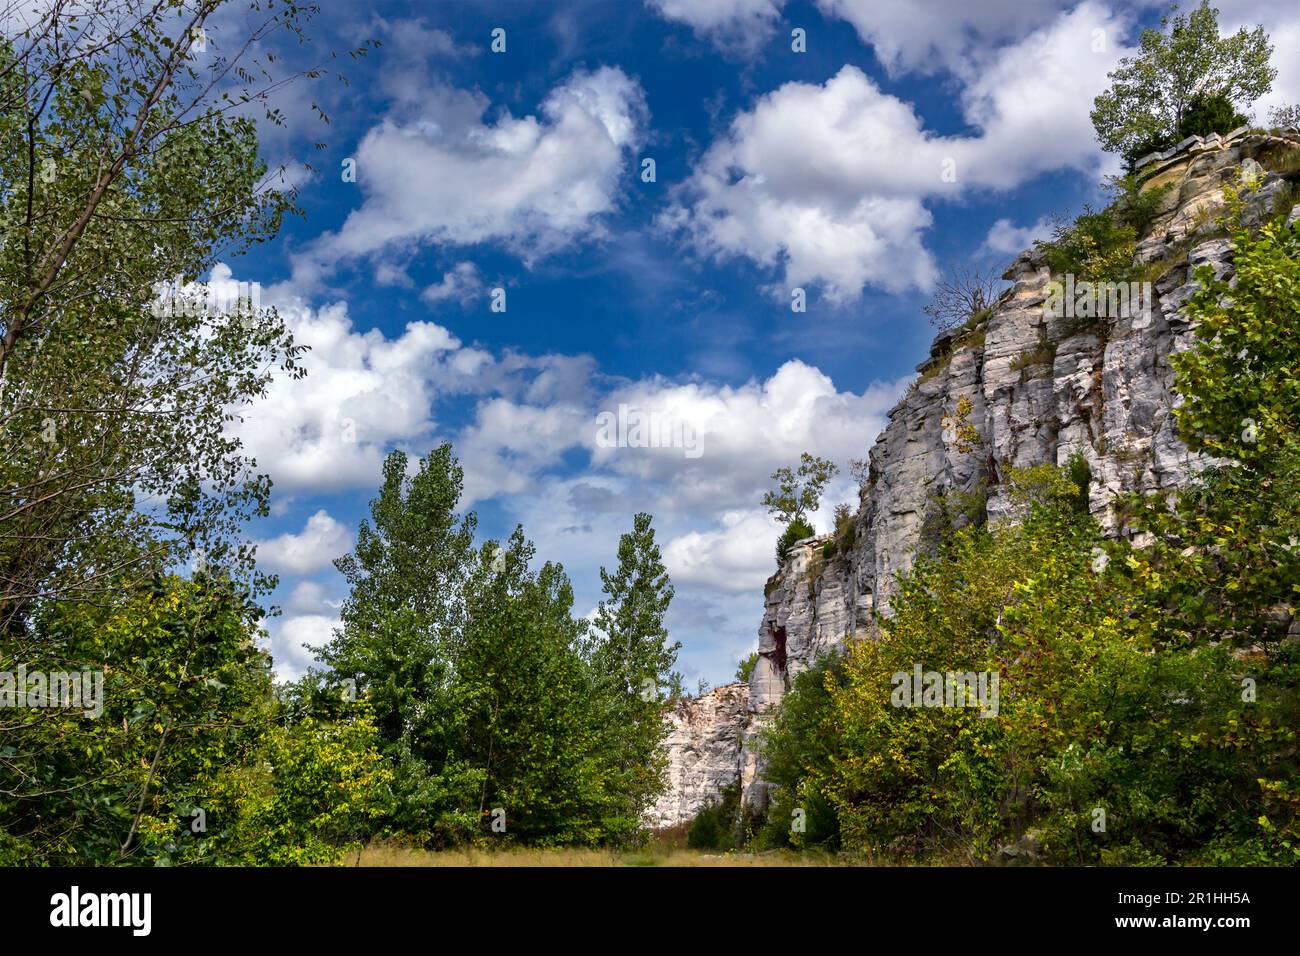 Landscape with cloudy sky and rock bluffs at Klondike Park in St ...